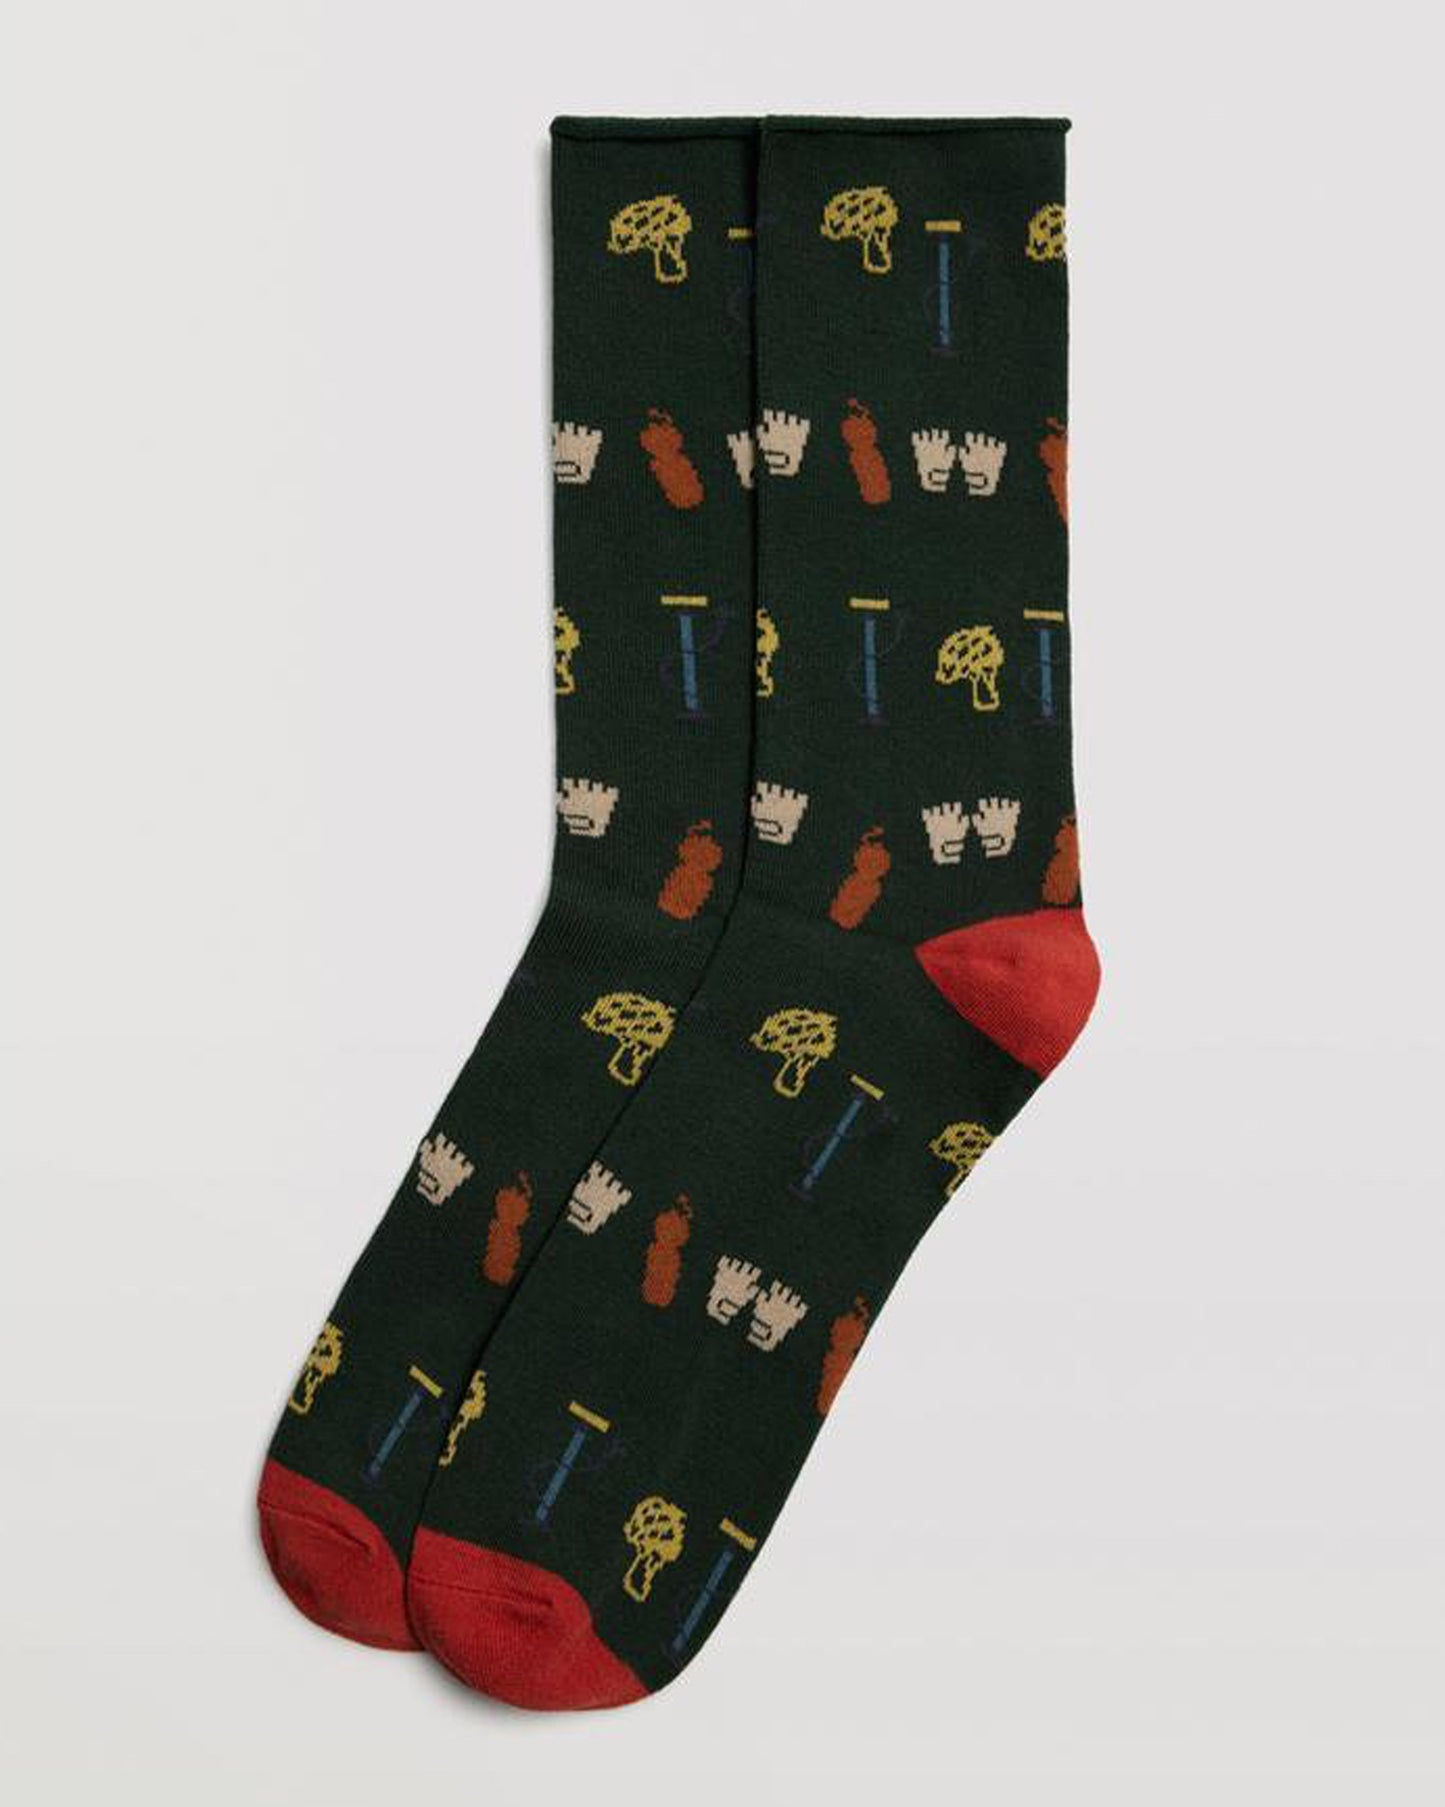 Ysabel Mora 22882 Cycling Socks - Dark green cotton mix crew length no cuff ankle socks with an all over cycling themed pattern made up of bicycle pump, helmet, gloves and water bottle in yellow, rust, blue and cream, red heel and toe.